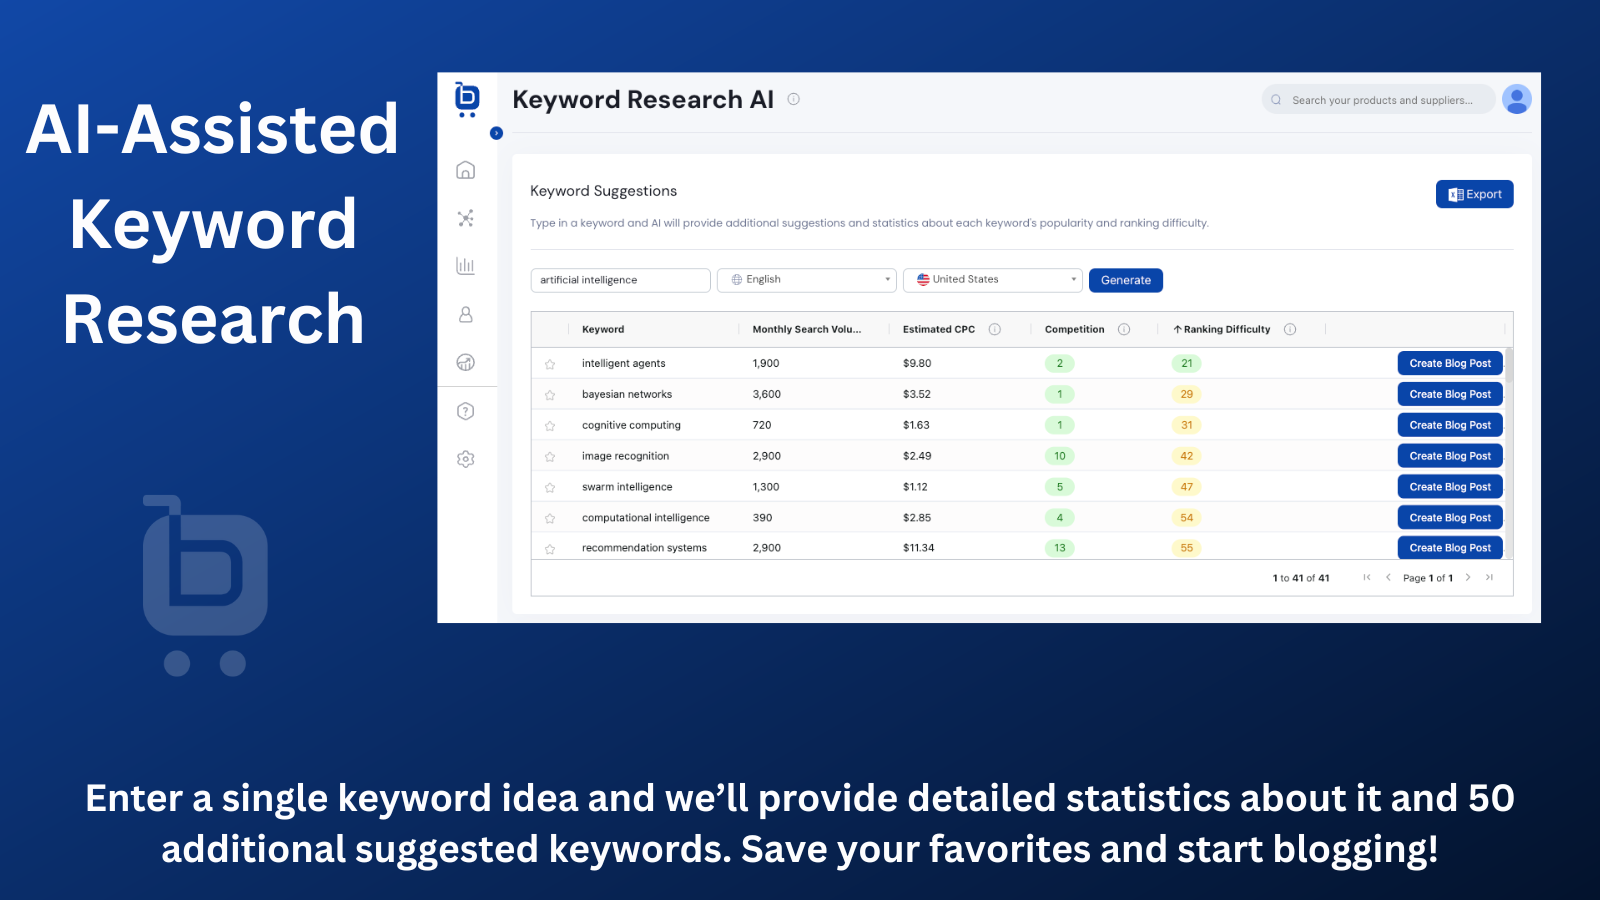 Use Boardroom to find promising keywords, assisted by AI